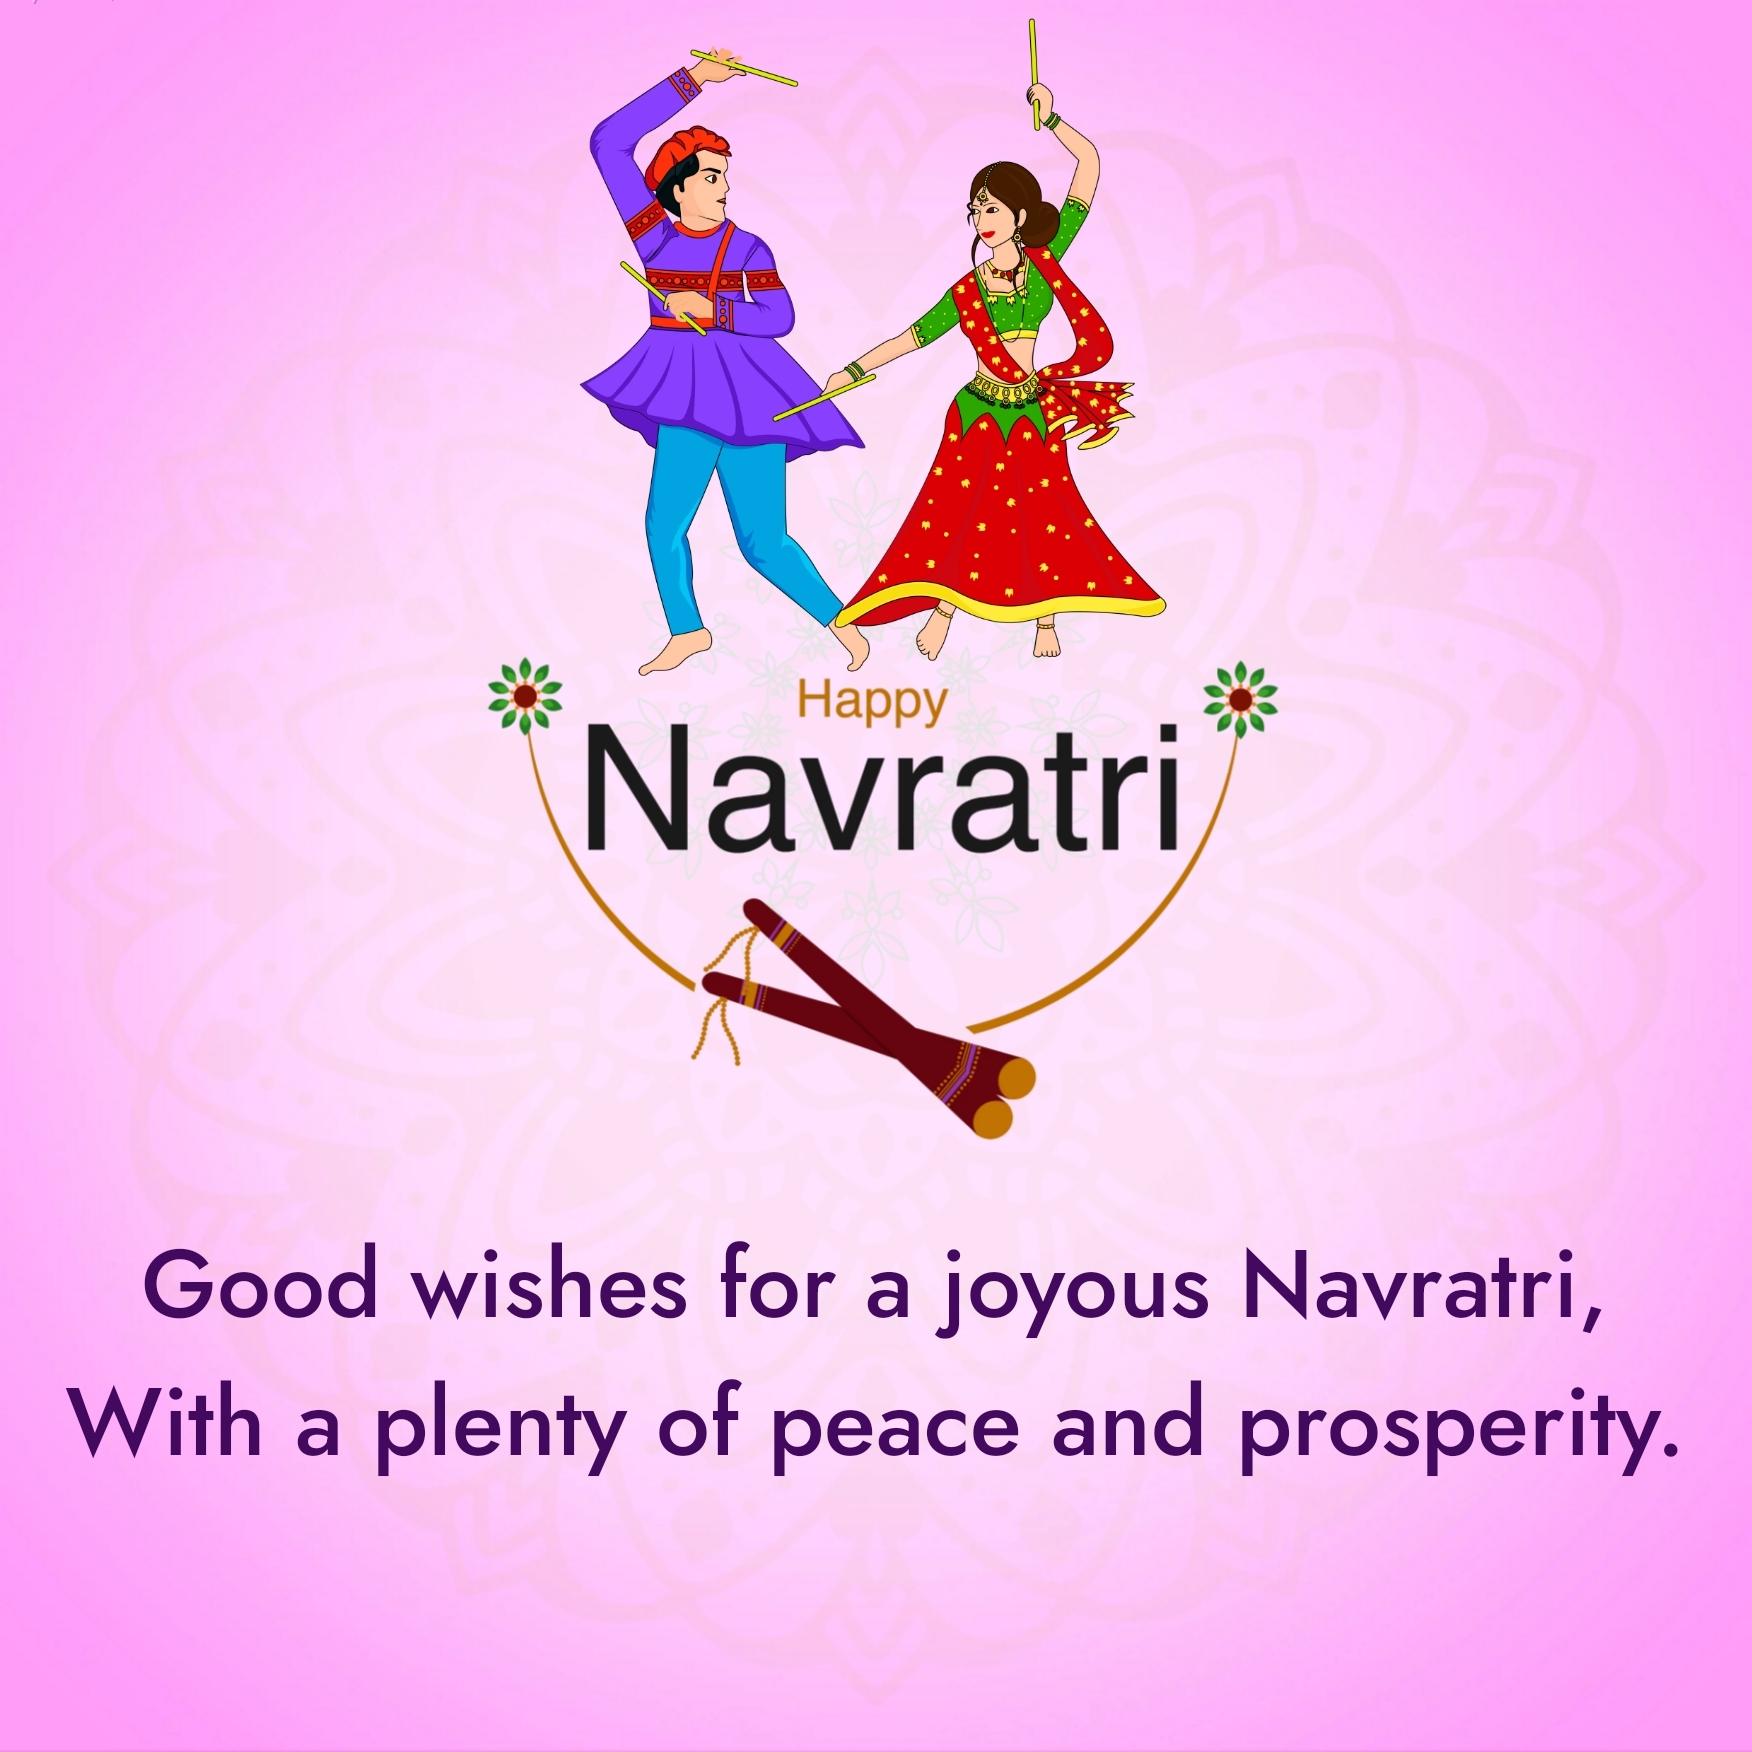 Good wishes for a joyous Navratri With a plenty of peace